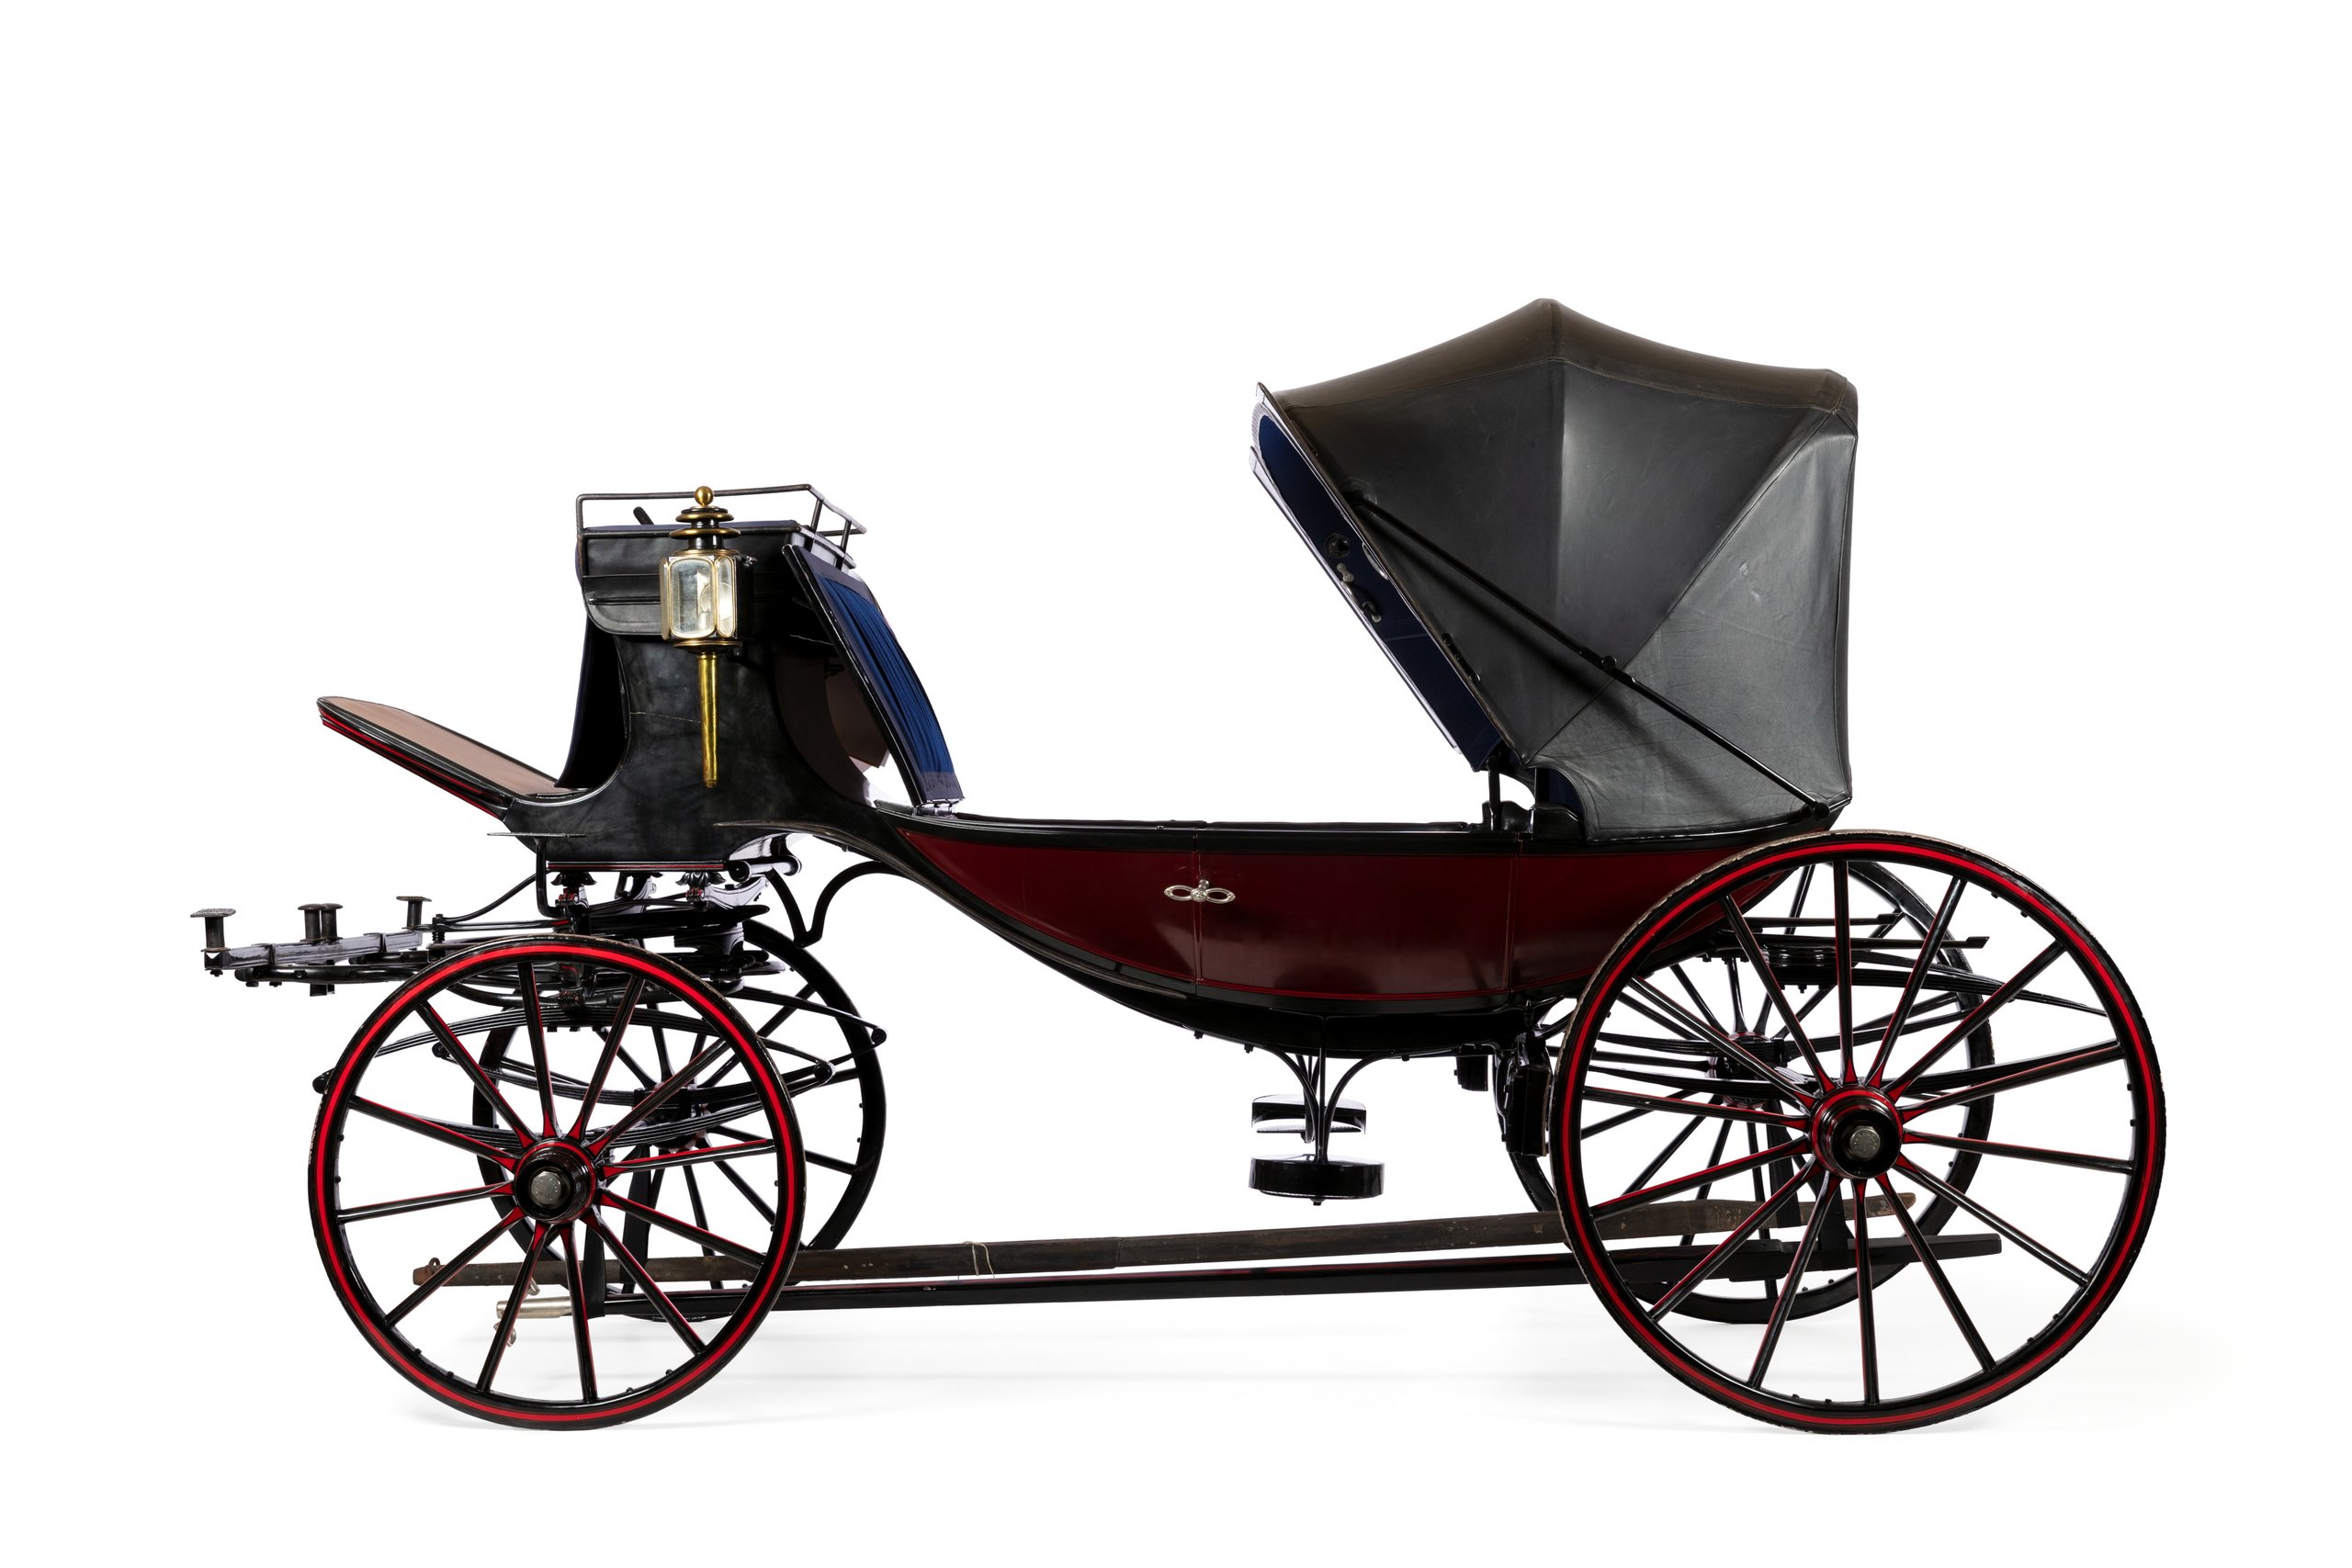 Barouch carriage owned by John Brown Watt